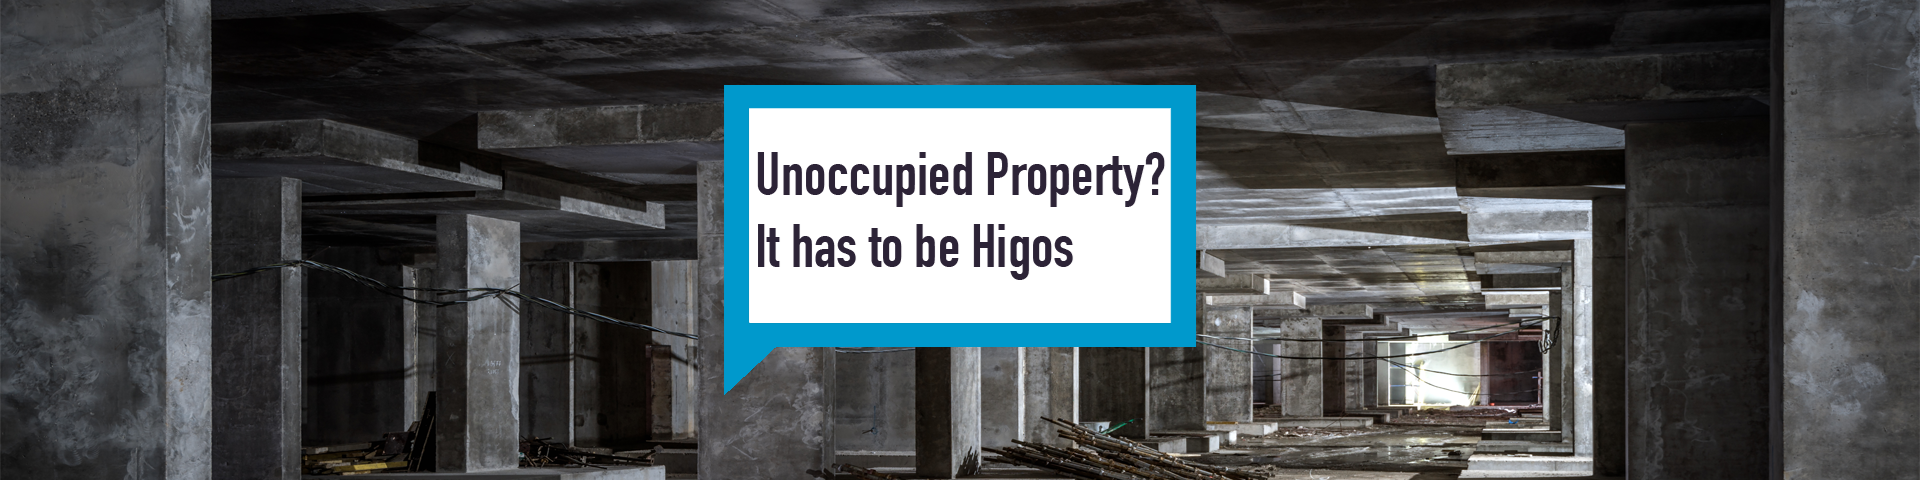 Higos Personal insurance unoccupied property